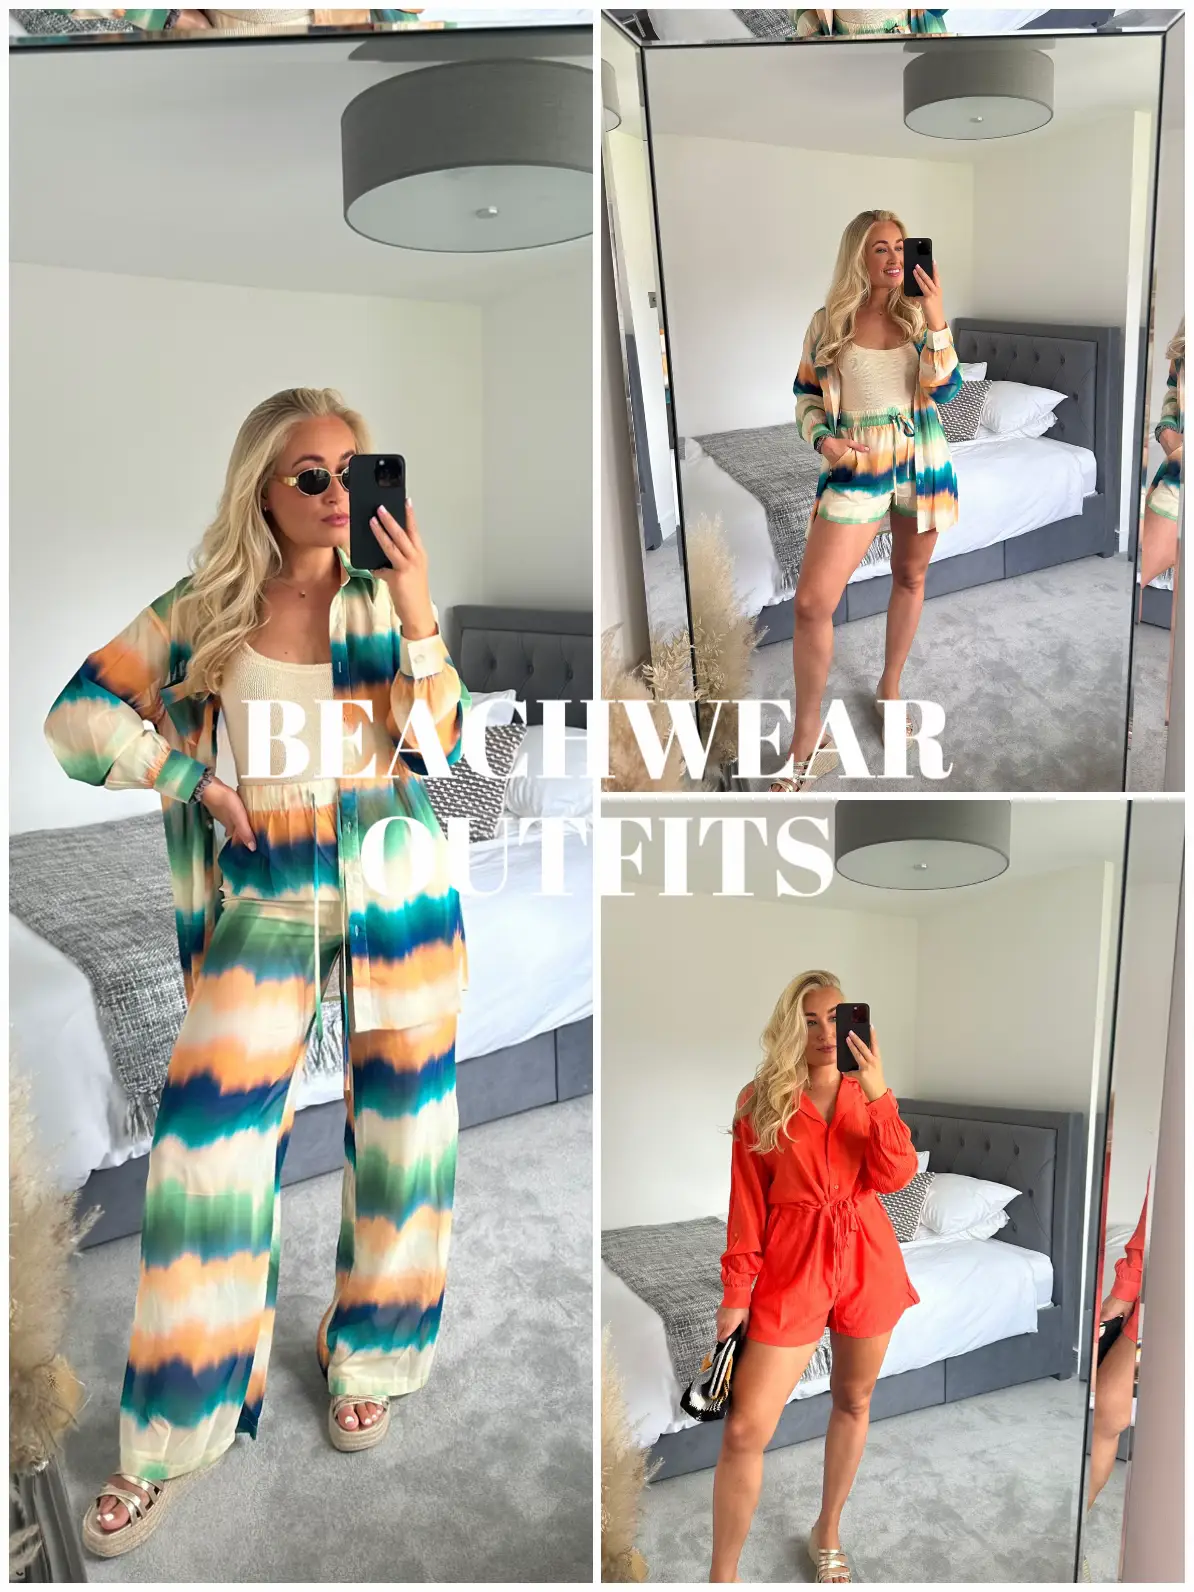 BEACHWEAR outfits 🧡, Gallery posted by wornbymolly